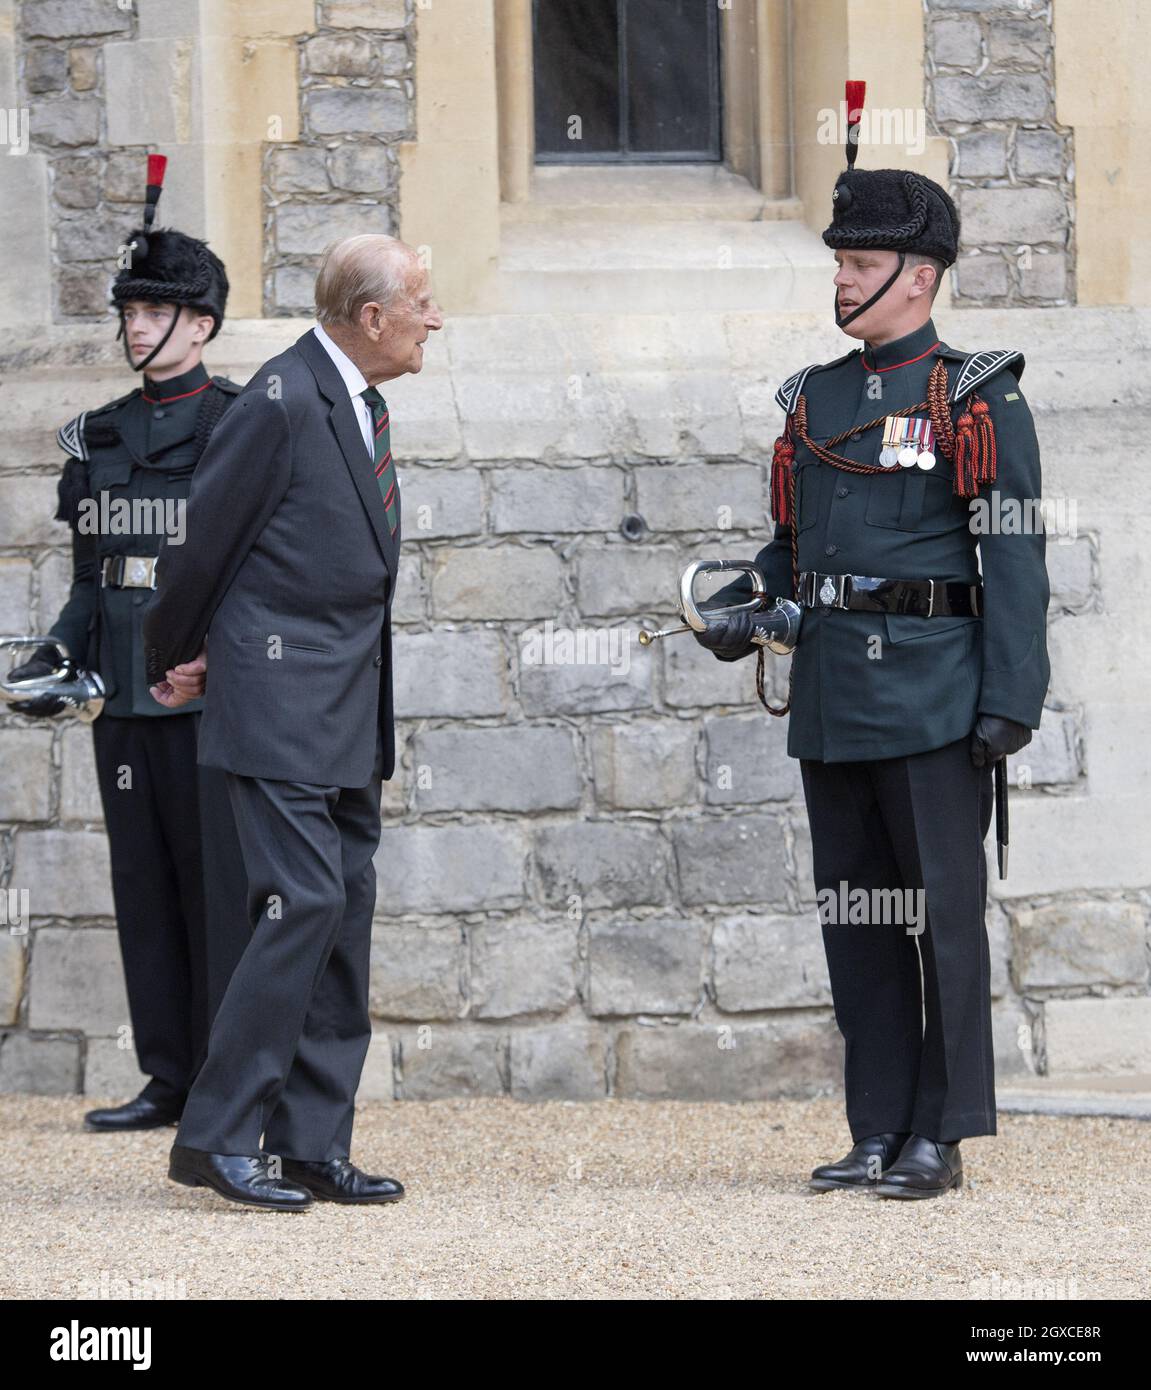 Prince Philip, Duke of Edinburgh attends a ceremony to mark the transfer of the Colonel-in-Chief of The Rifles at Windsor Castle on July 22, 2020.  The 99 year old Duke is stepping down from his role as Colonel-in-Chief after 67 years of service and is transferring it to Camilla,Duchess of Cornwall. Stock Photo